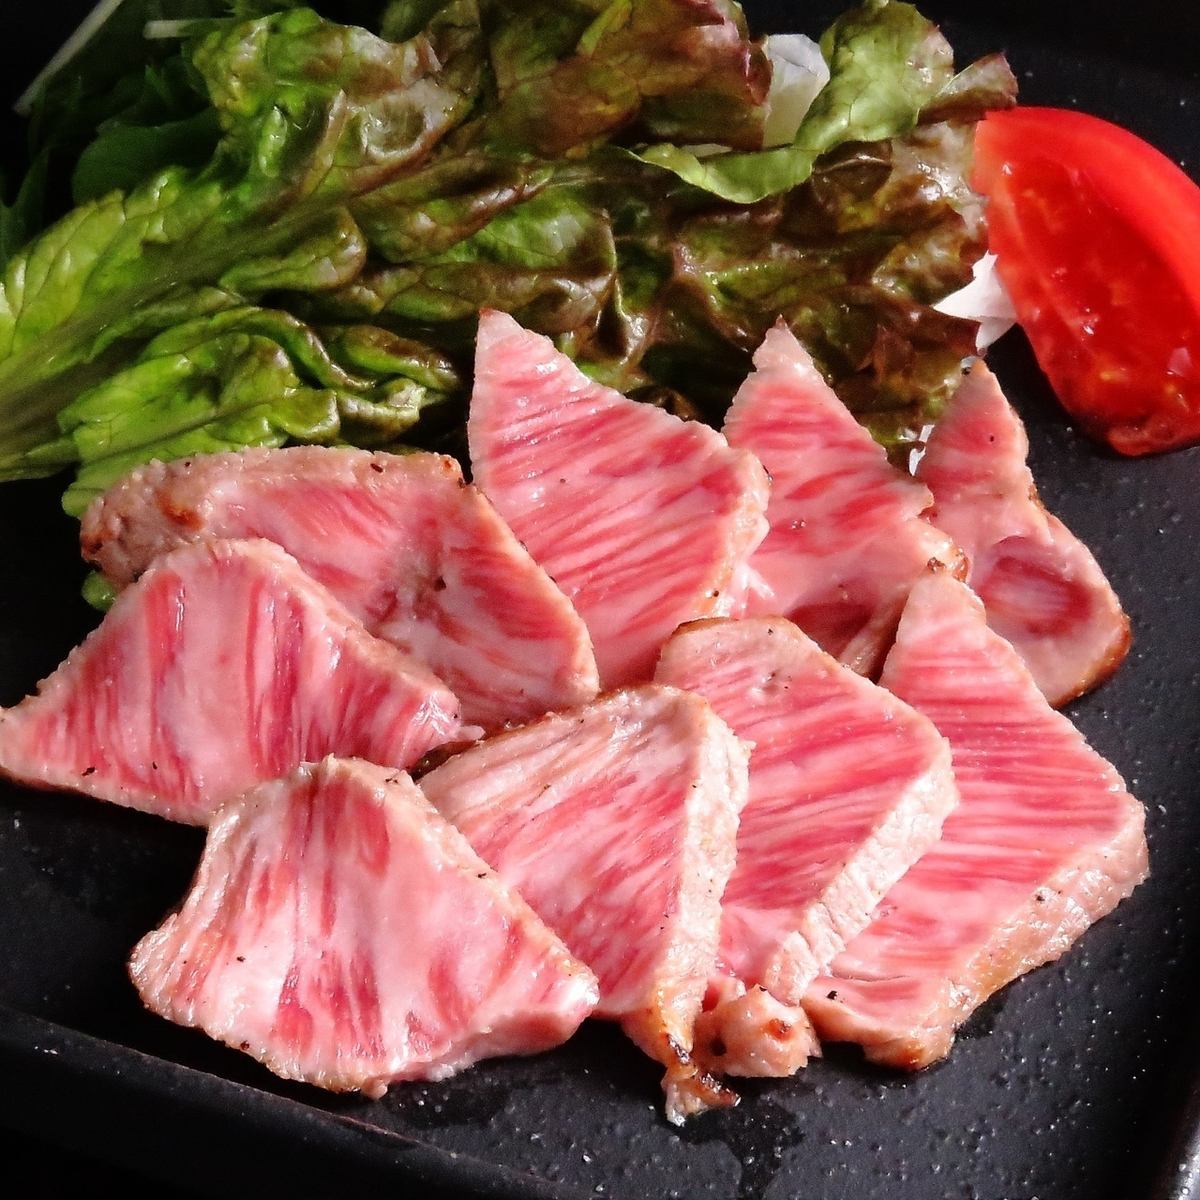 Kuroge Wagyu beef that melts in your mouth the moment you put it in your mouth! Satisfying taste and quantity!